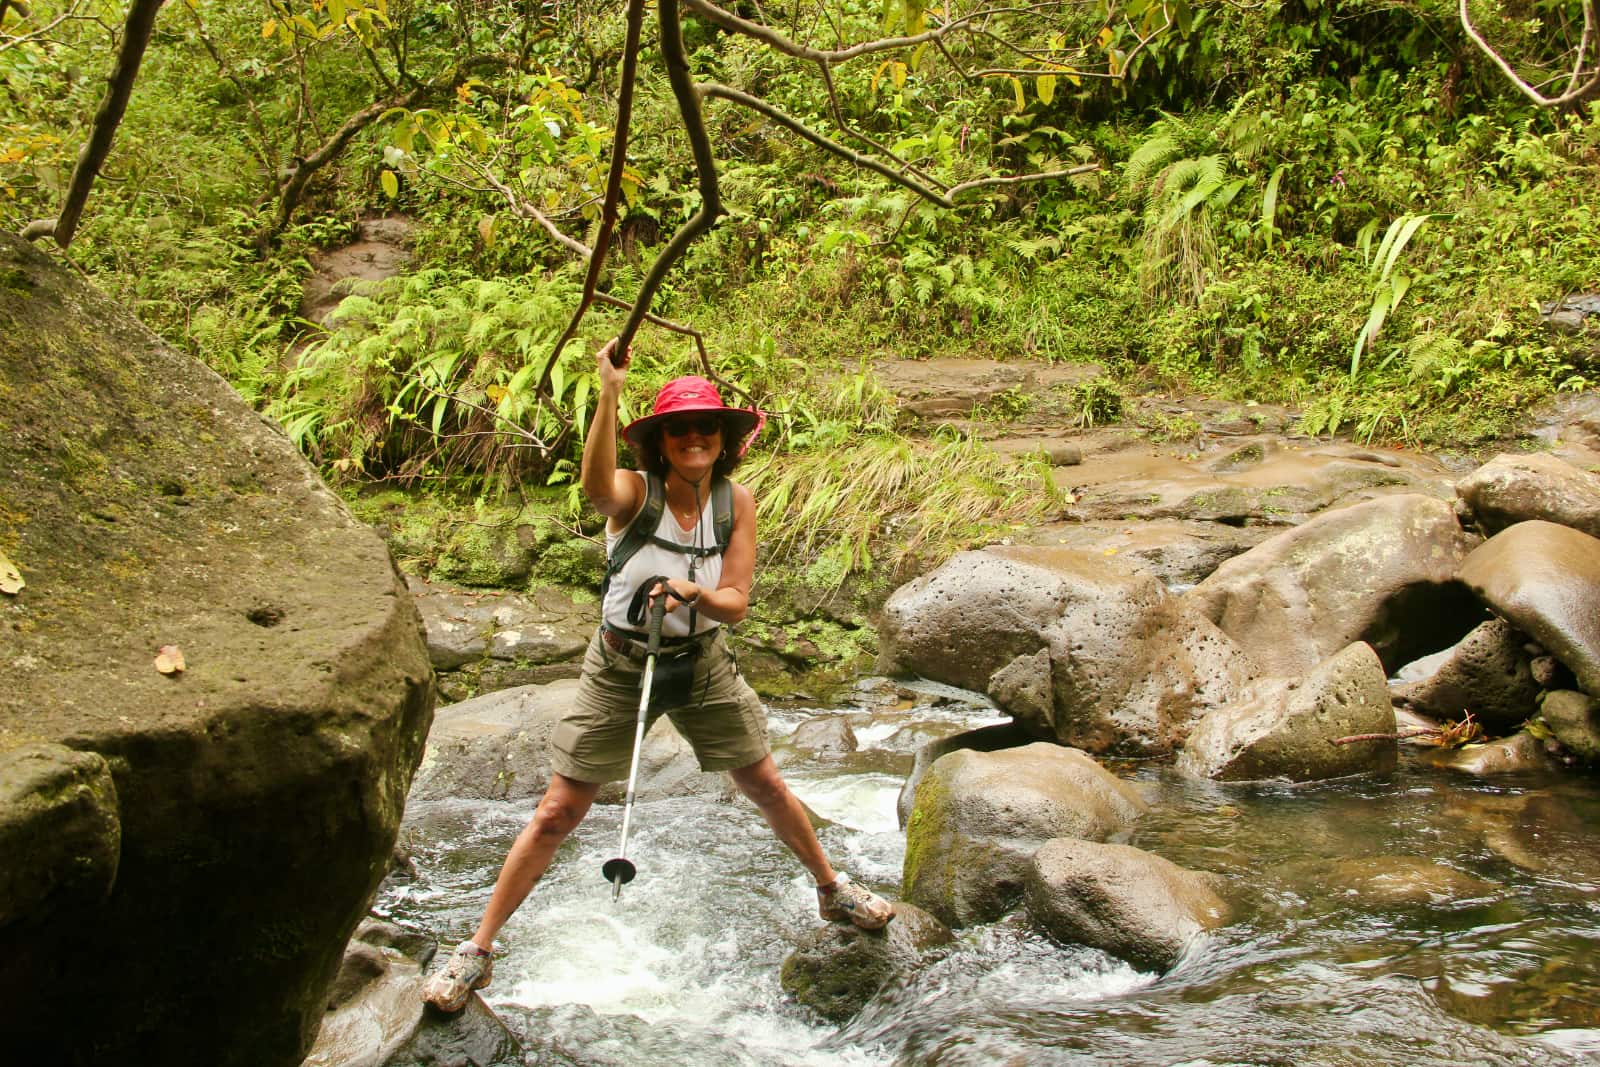 Woman with red hat crossing river in rainforest